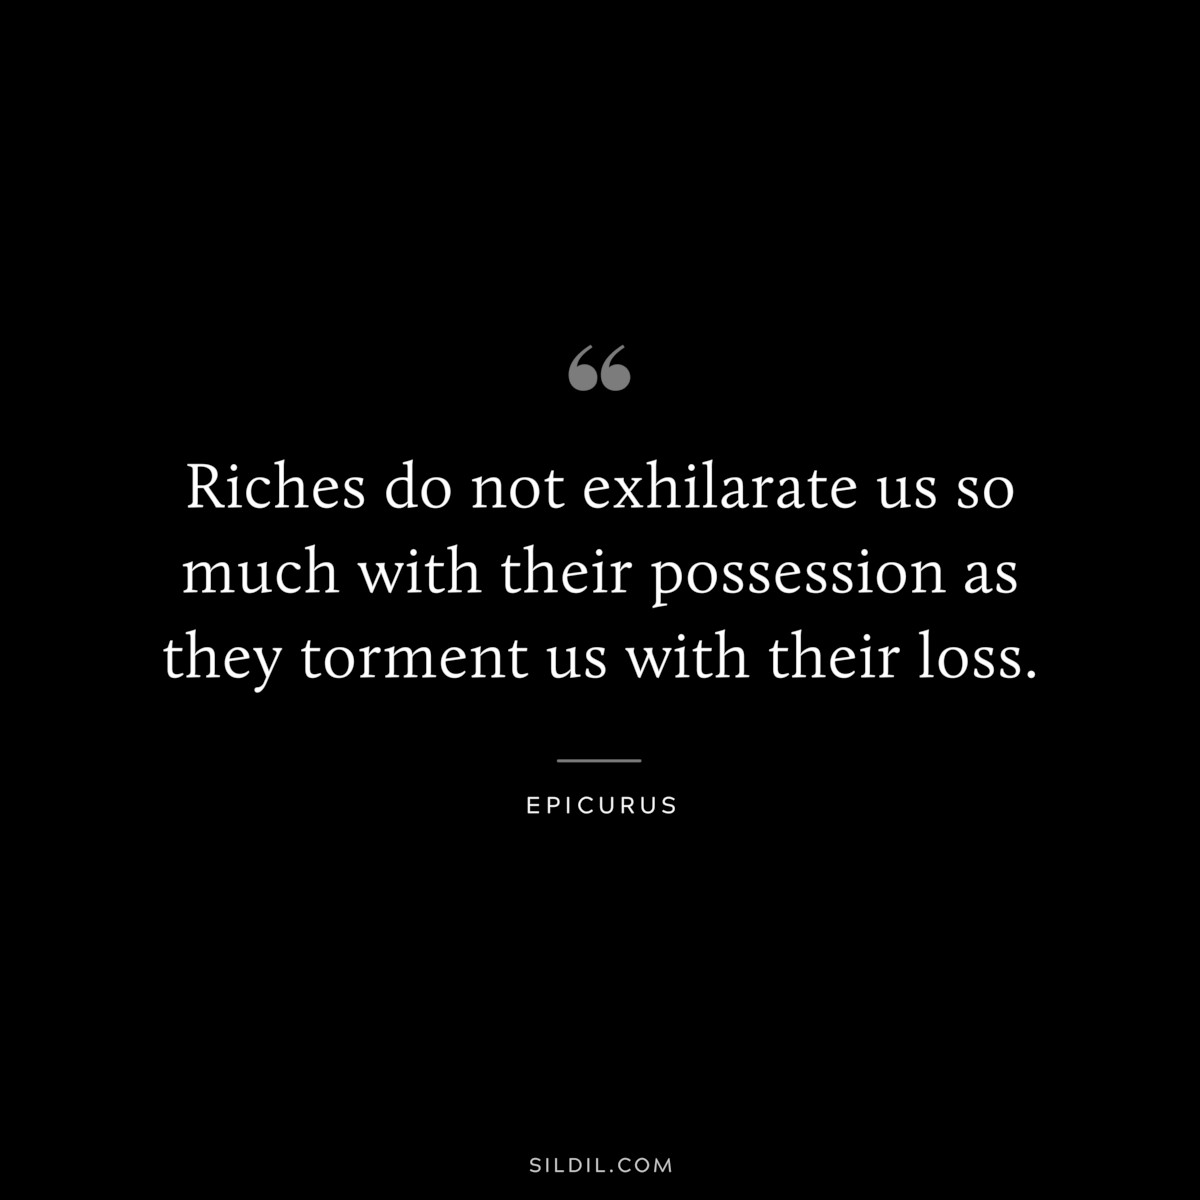 Riches do not exhilarate us so much with their possession as they torment us with their loss. — Epicurus